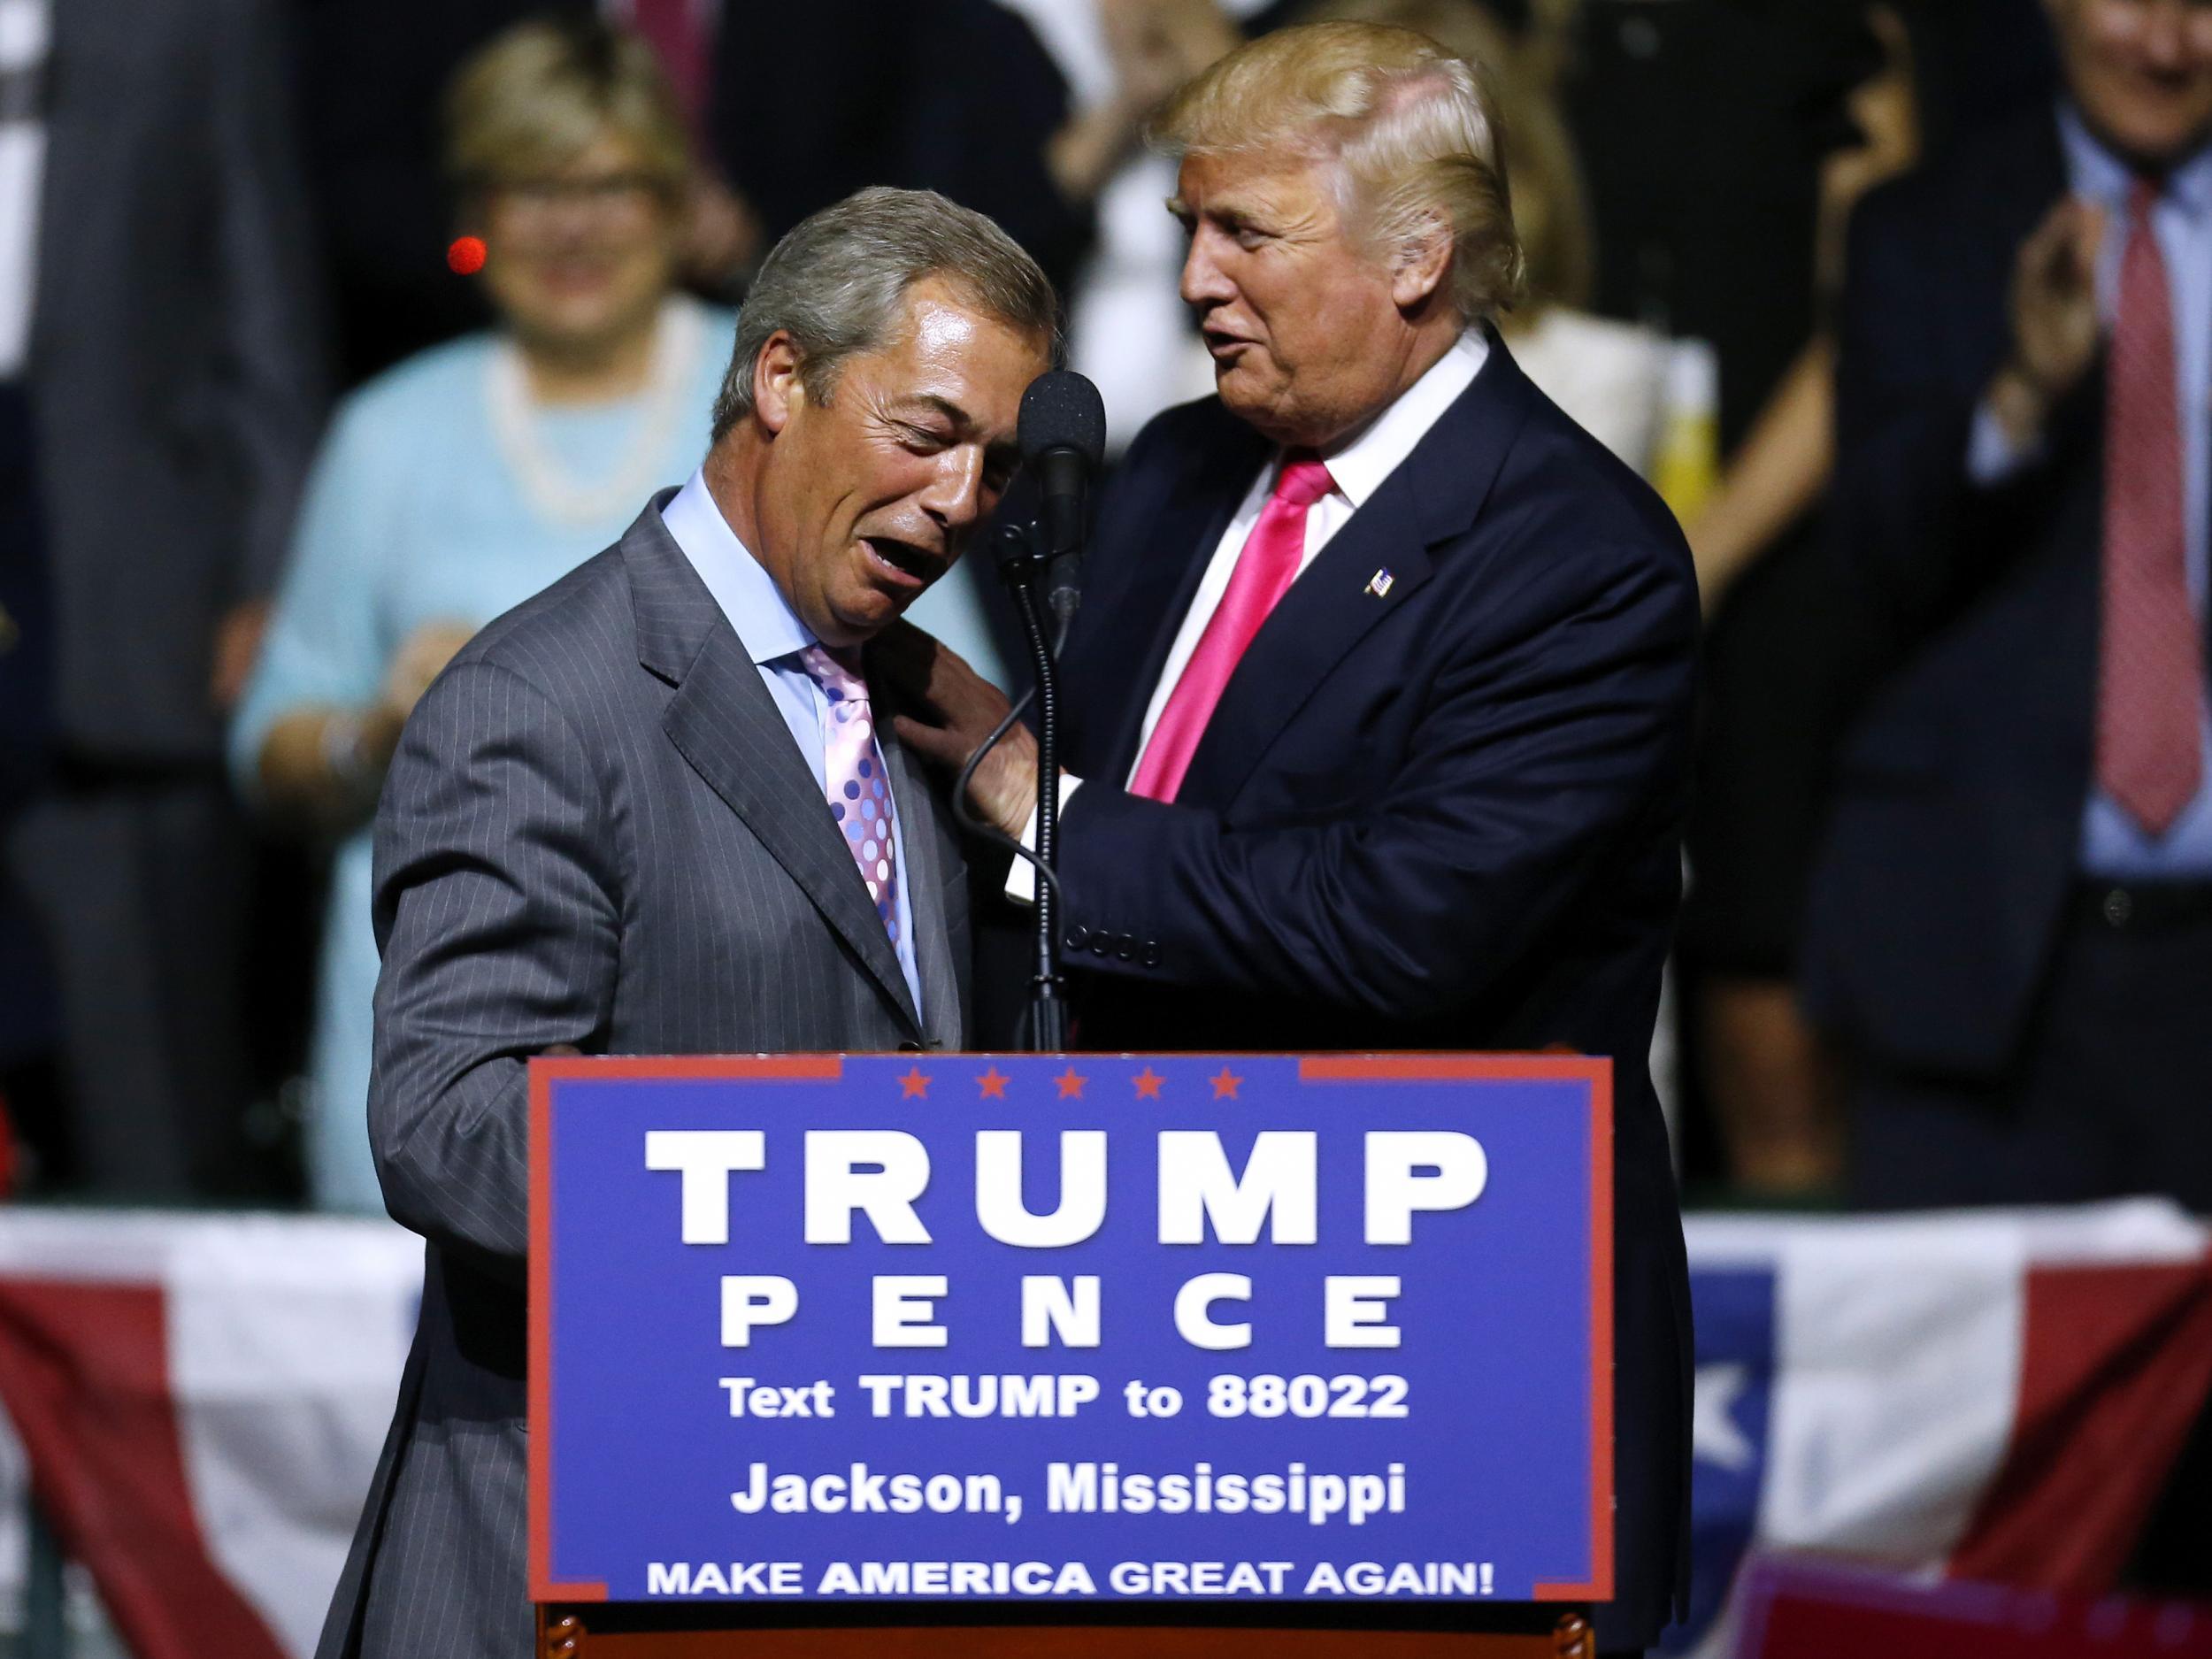 Nigel Farage campaigned on behalf of President Trump, but has condemned his recent cruise missile assault on a Syrian airbase